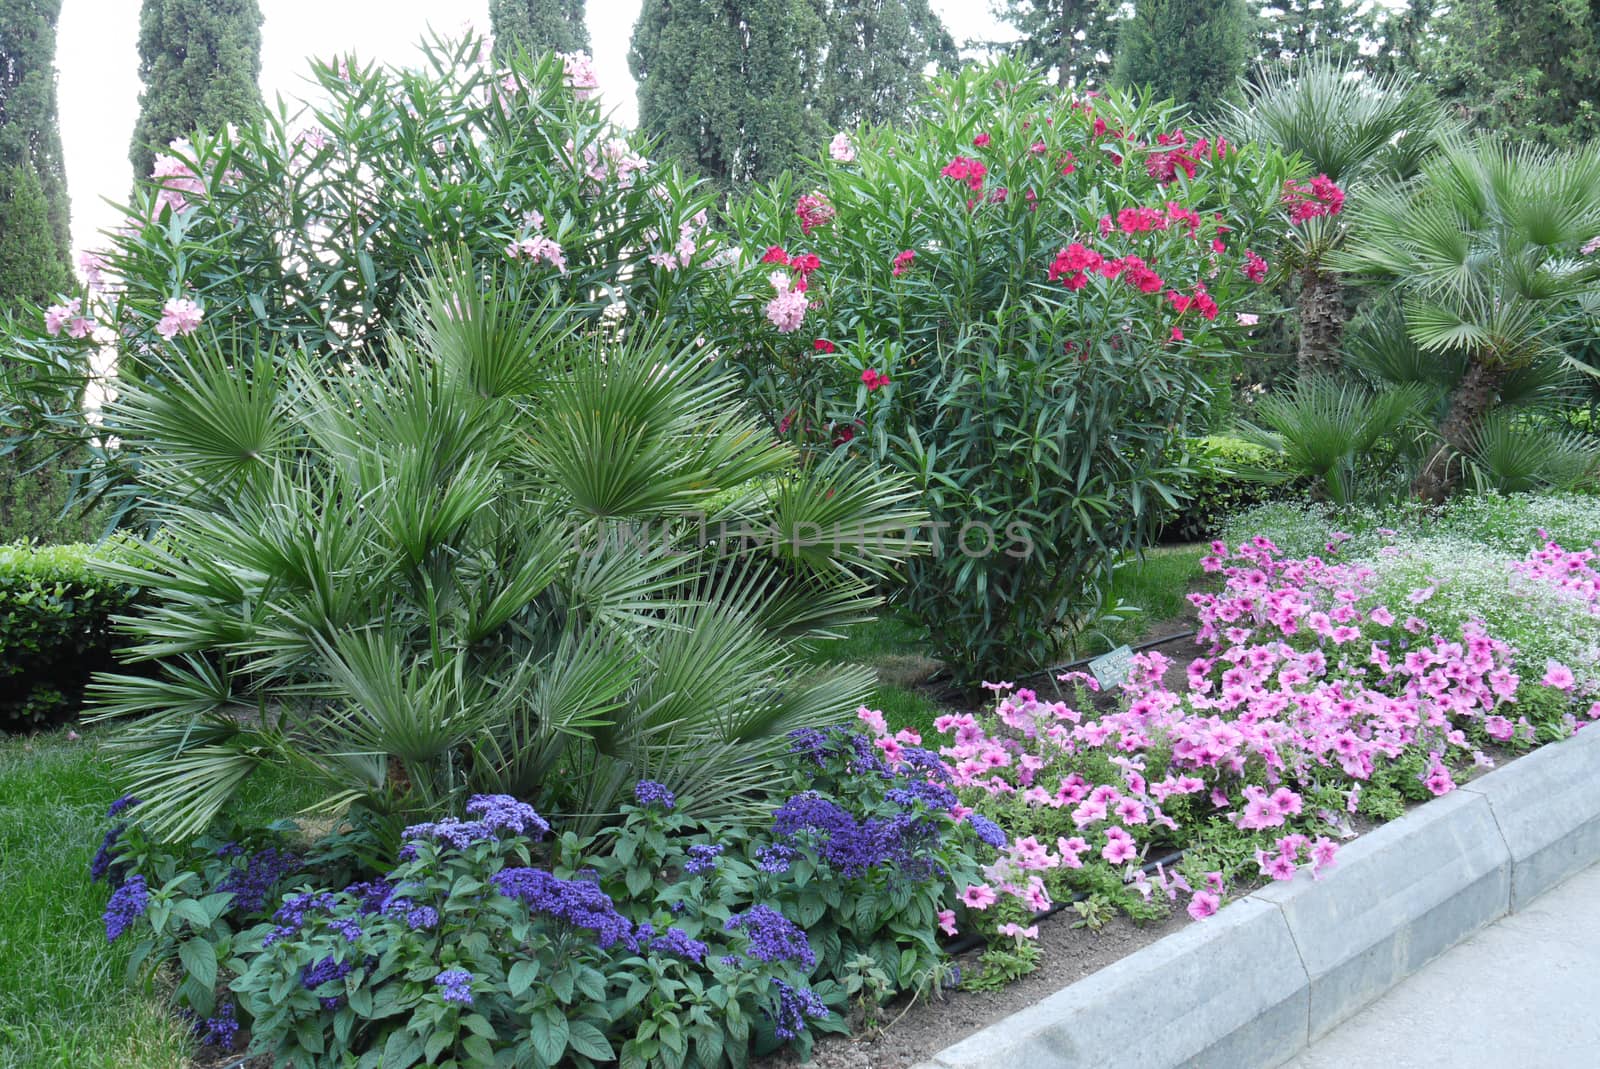 A flower bed with blue, pink and crimson flowers. I want to take such beauty into the house, but it's a pity to tear it down